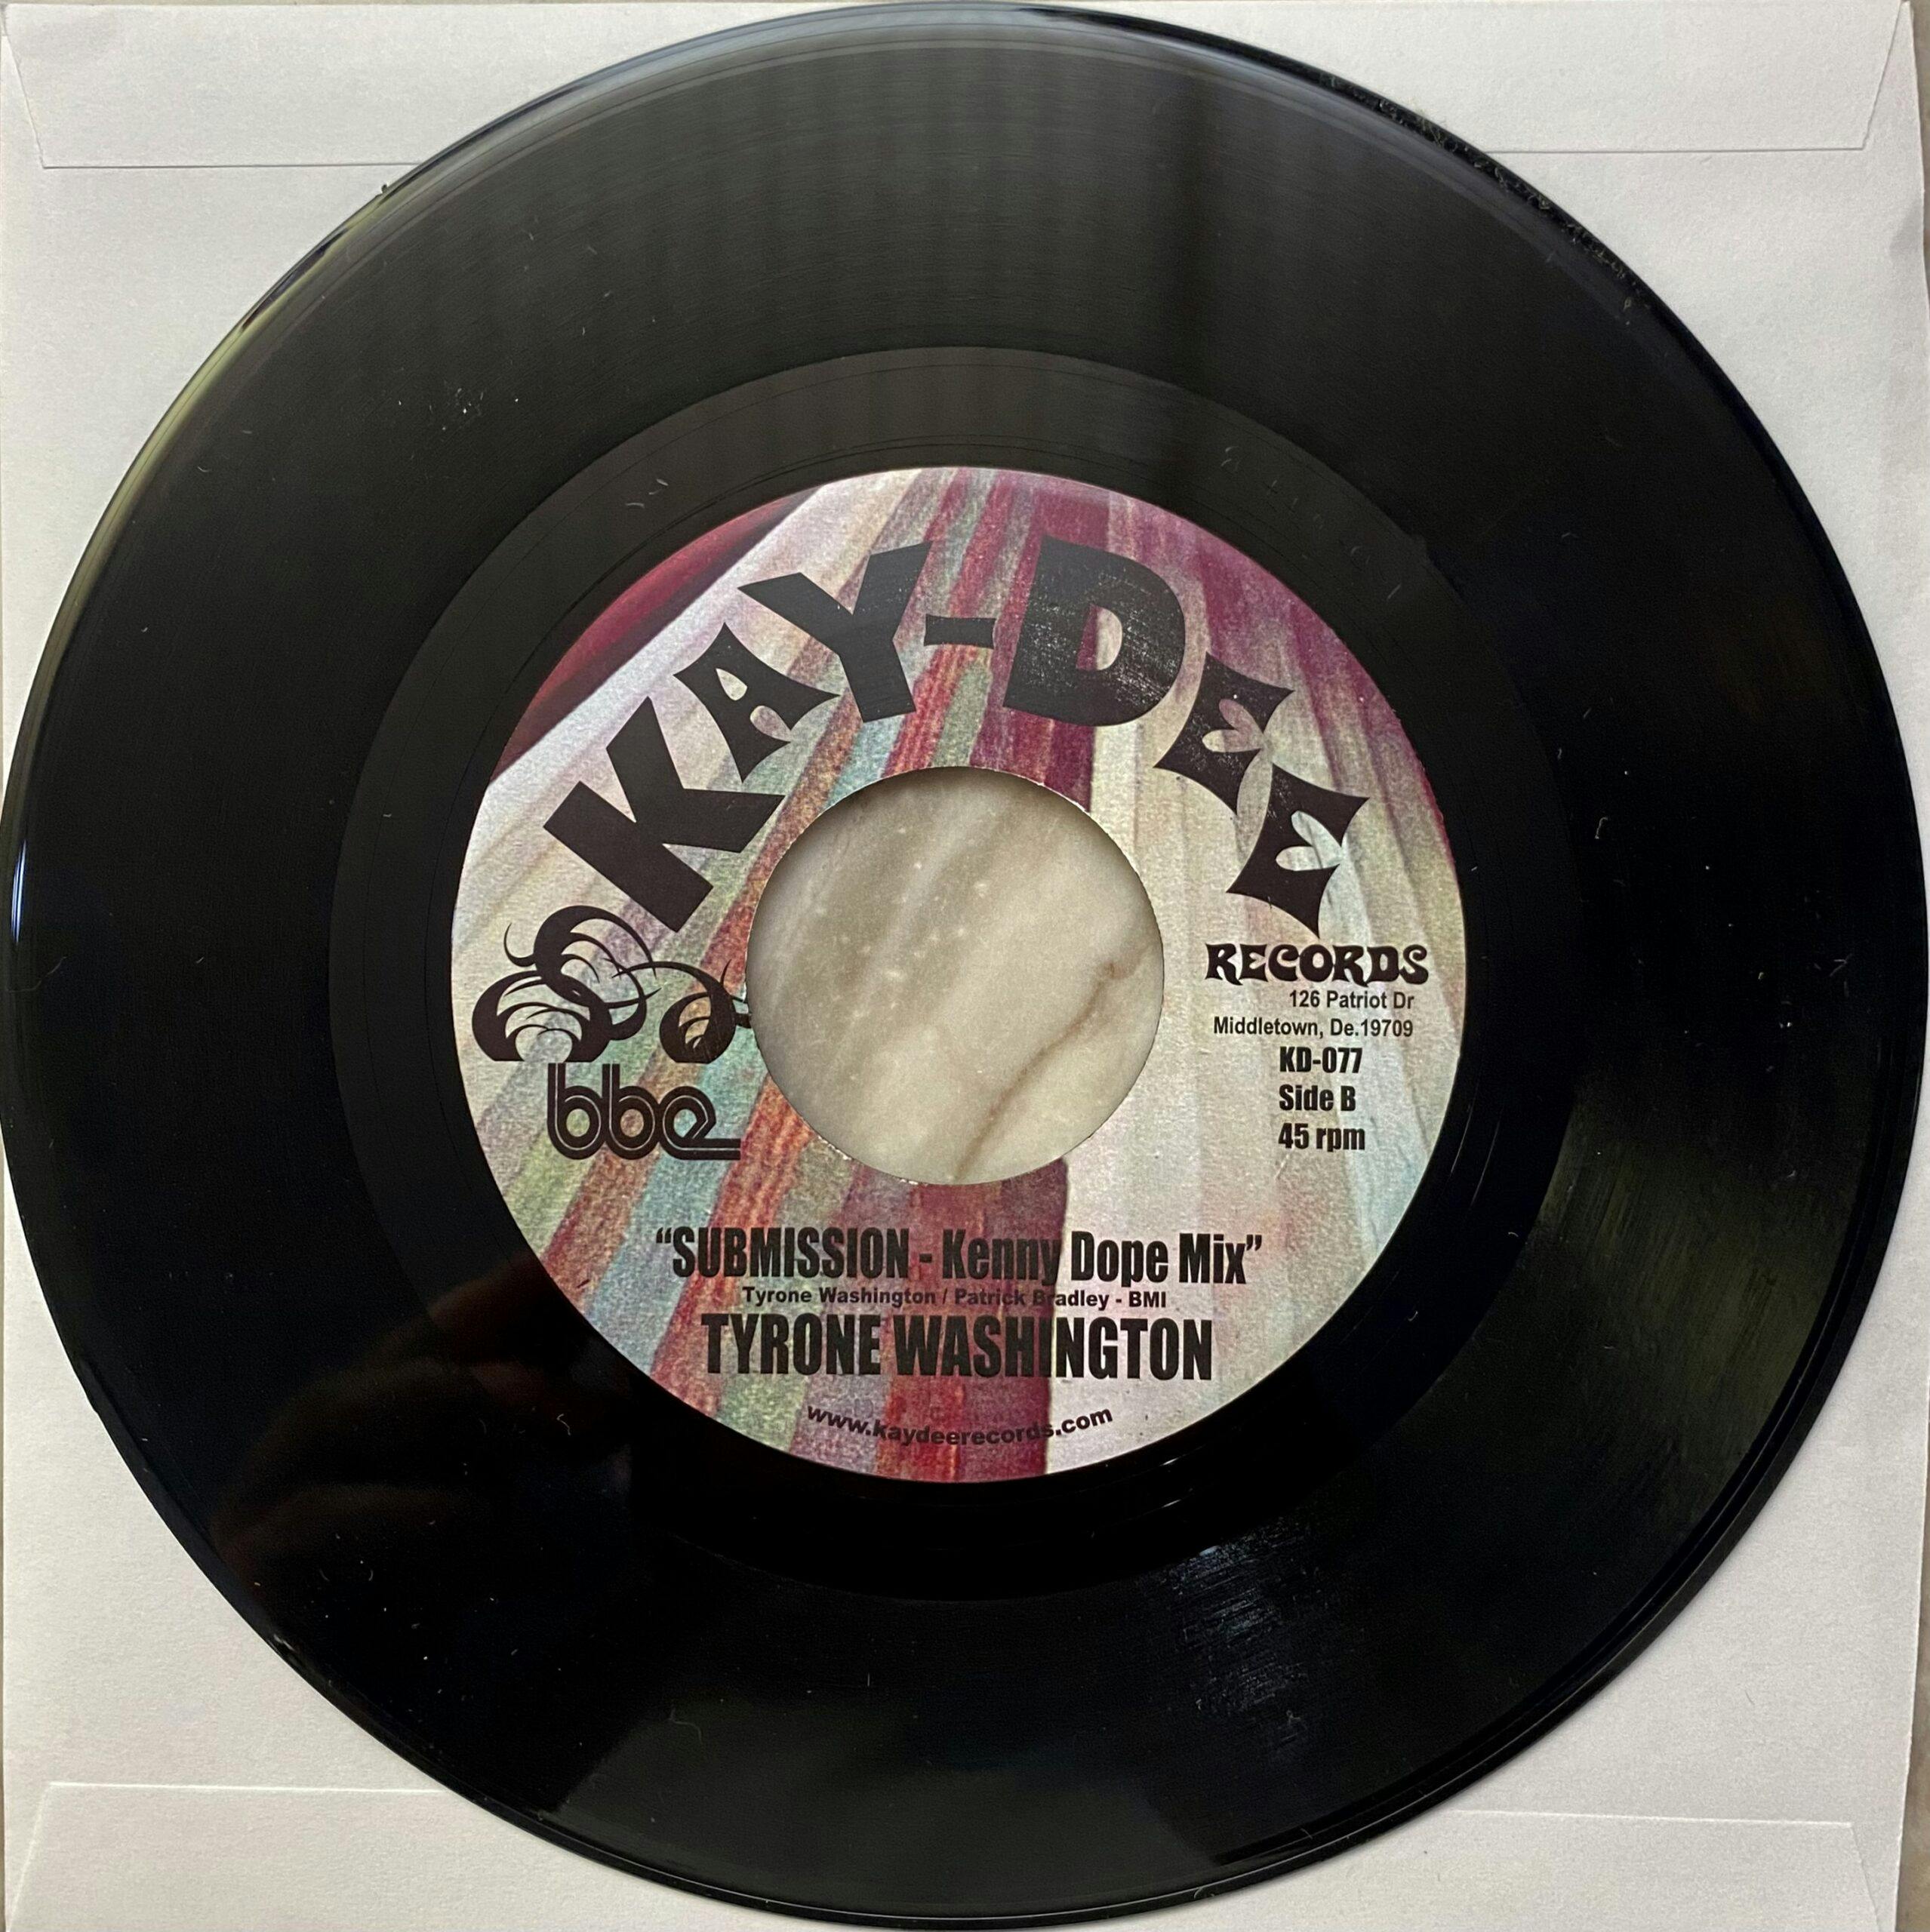 Now this 45 release is a real treat, featuring both the original and Kenny Dope remix of Tyrone Washington’s timeless gem, ‘Submission’.